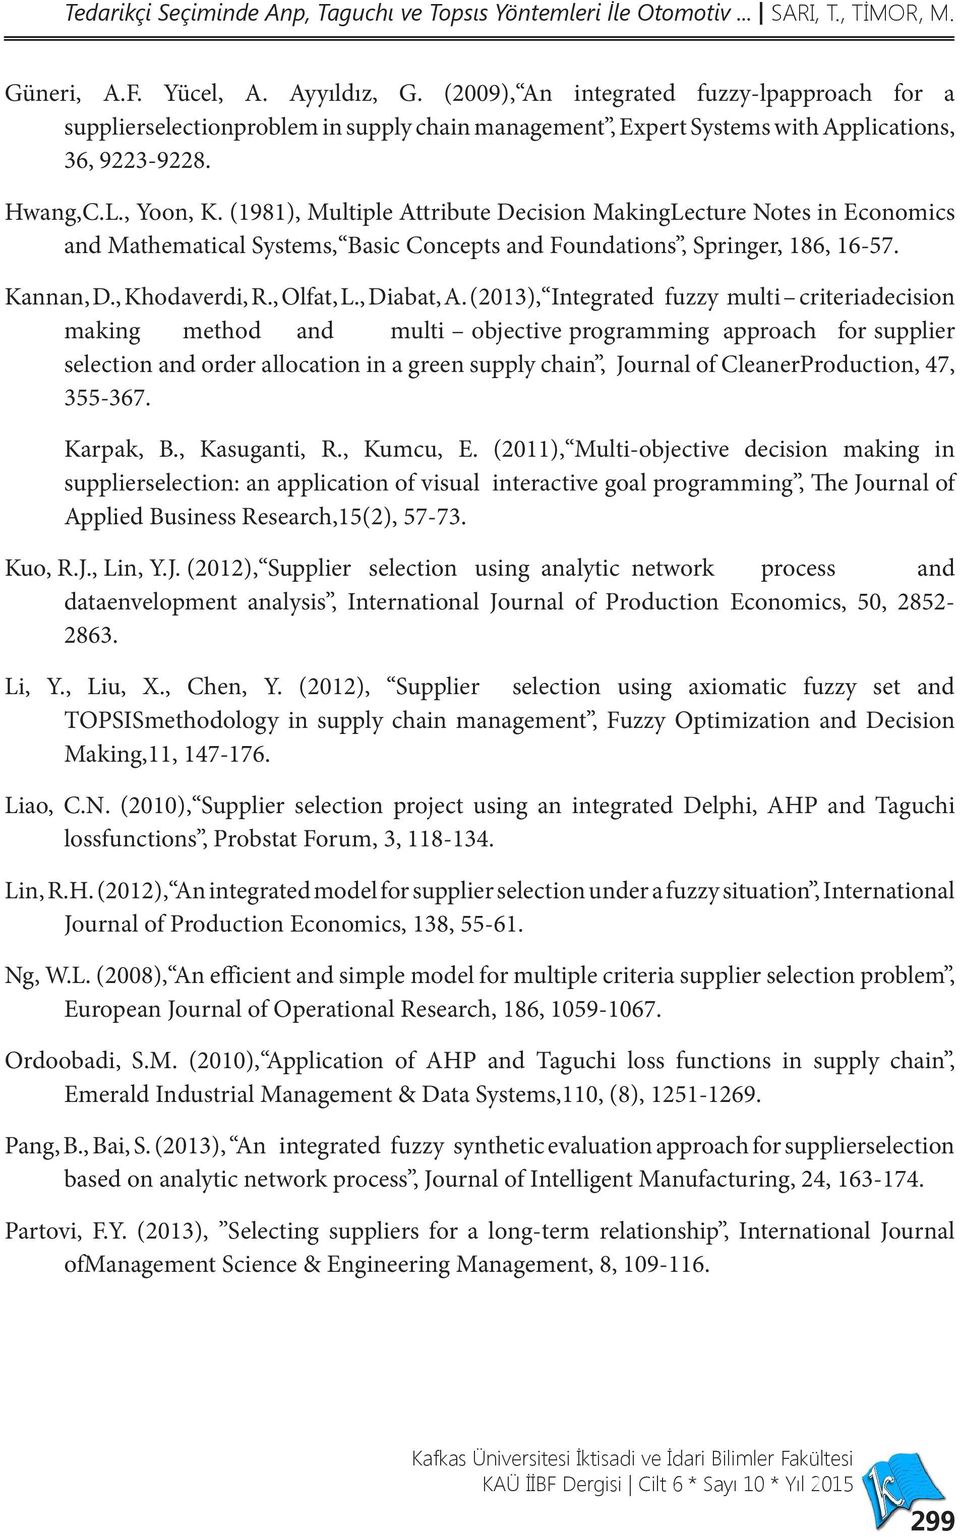 (1981), Multiple Attribute Decision MakingLecture Notes in Economics and Mathematical Systems, Basic Concepts and Foundations, Springer, 186, 16-57. Kannan, D., Khodaverdi, R., Olfat, L., Diabat, A.